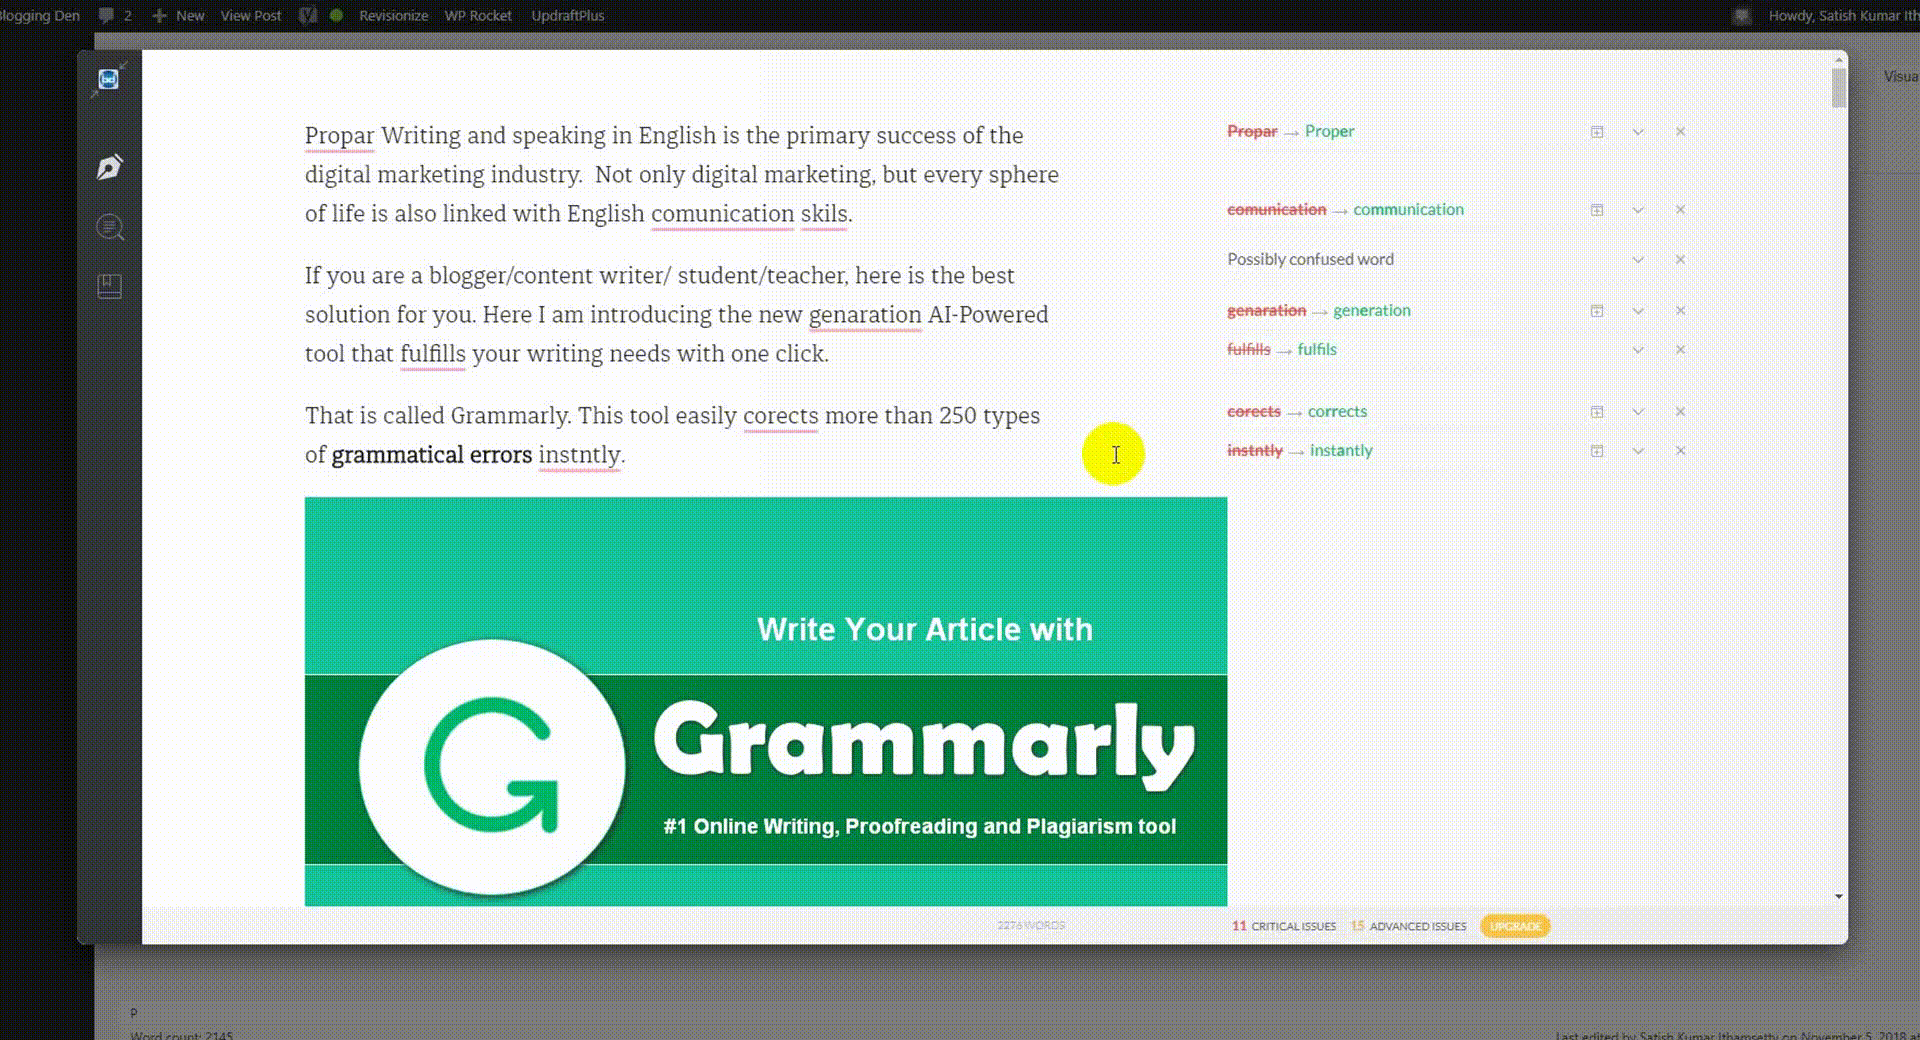 How to work with grammarly?